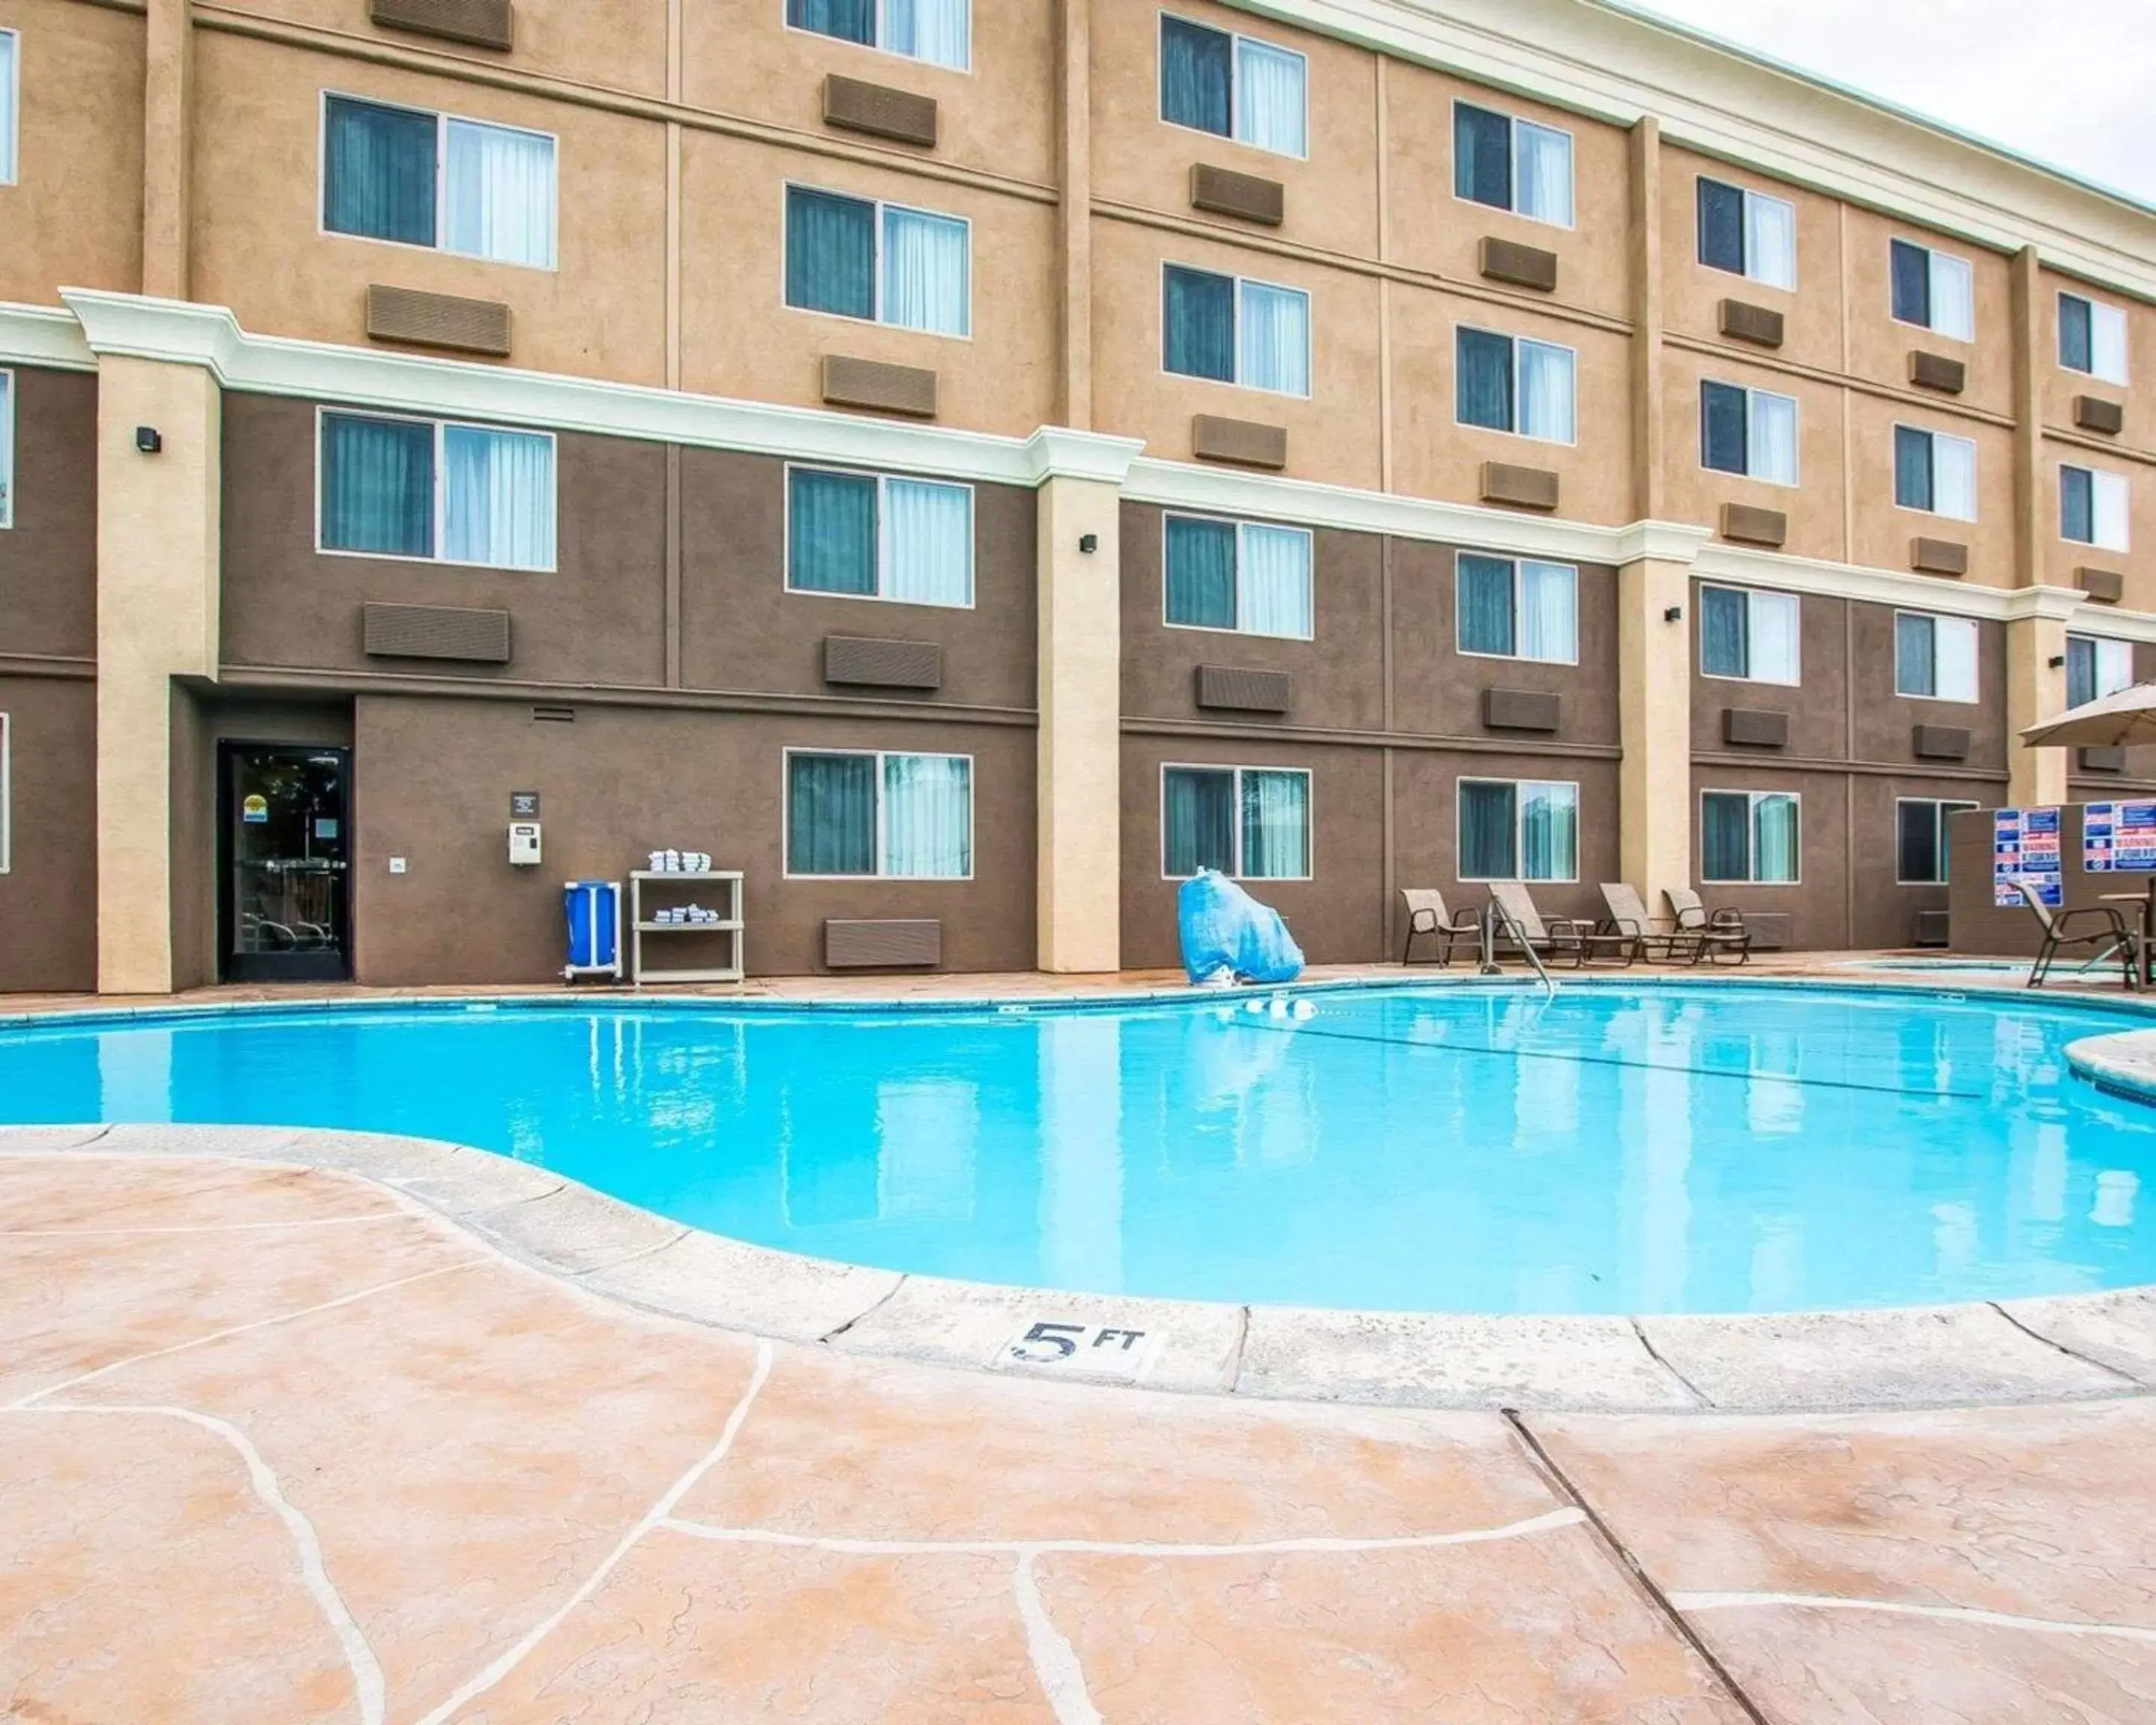 On site, Swimming Pool in Comfort Inn Chula Vista San Diego South